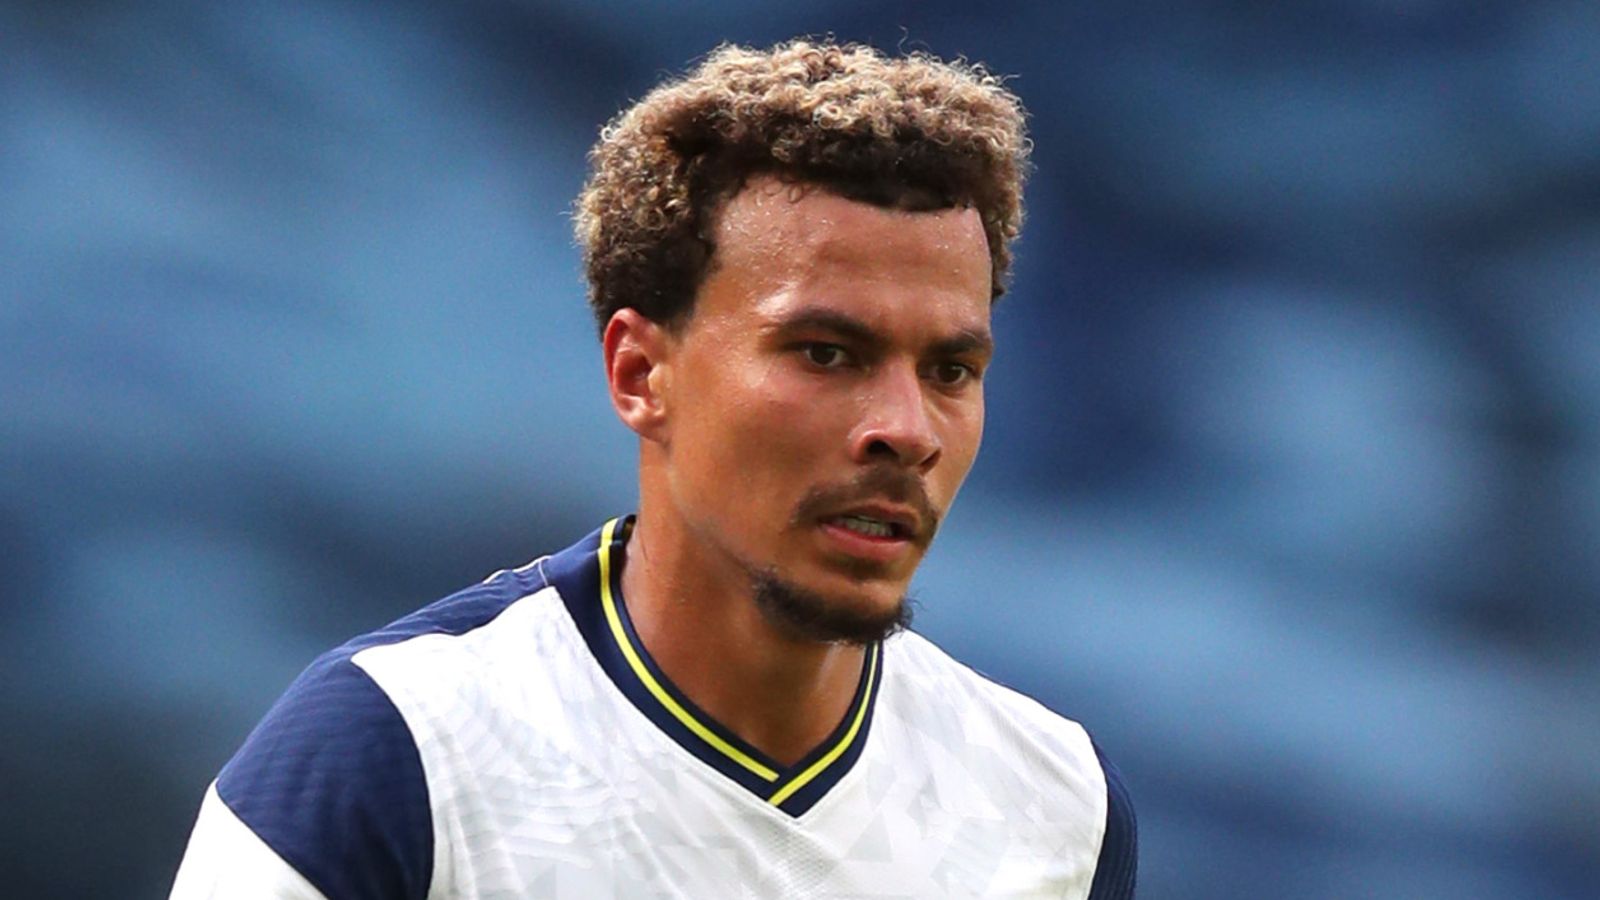 dele-alli-tottenham-star-out-of-jose-mourinhos-squad-for-newcastle-game-amid-exit-talk